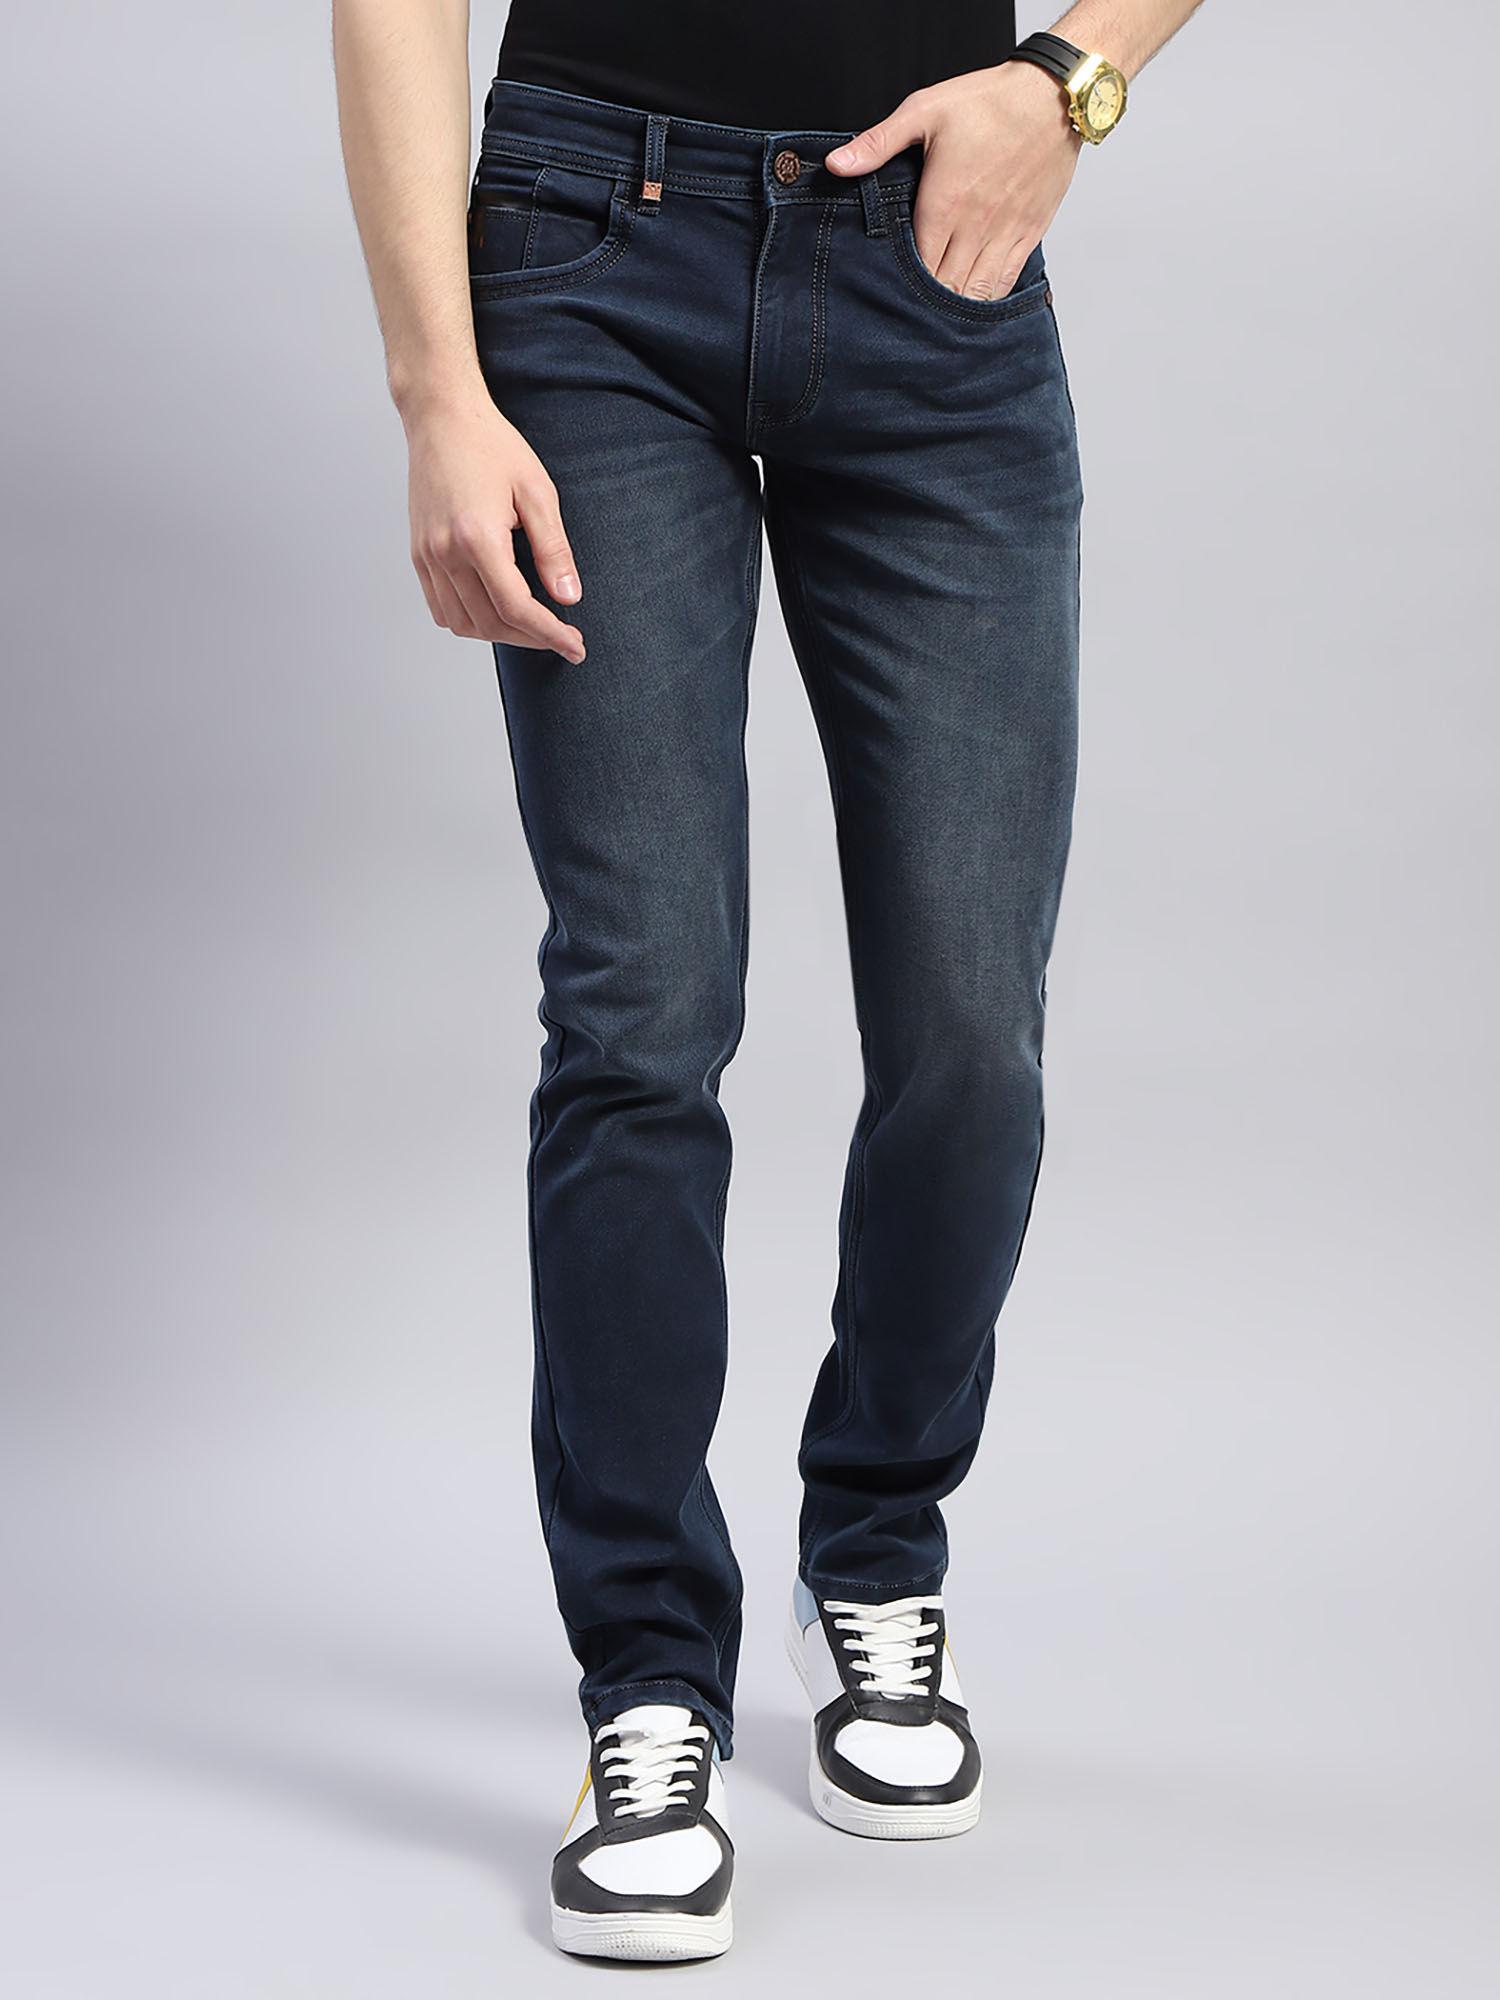 Mens Solid Navy Blue Straight Fit Casual Jeans